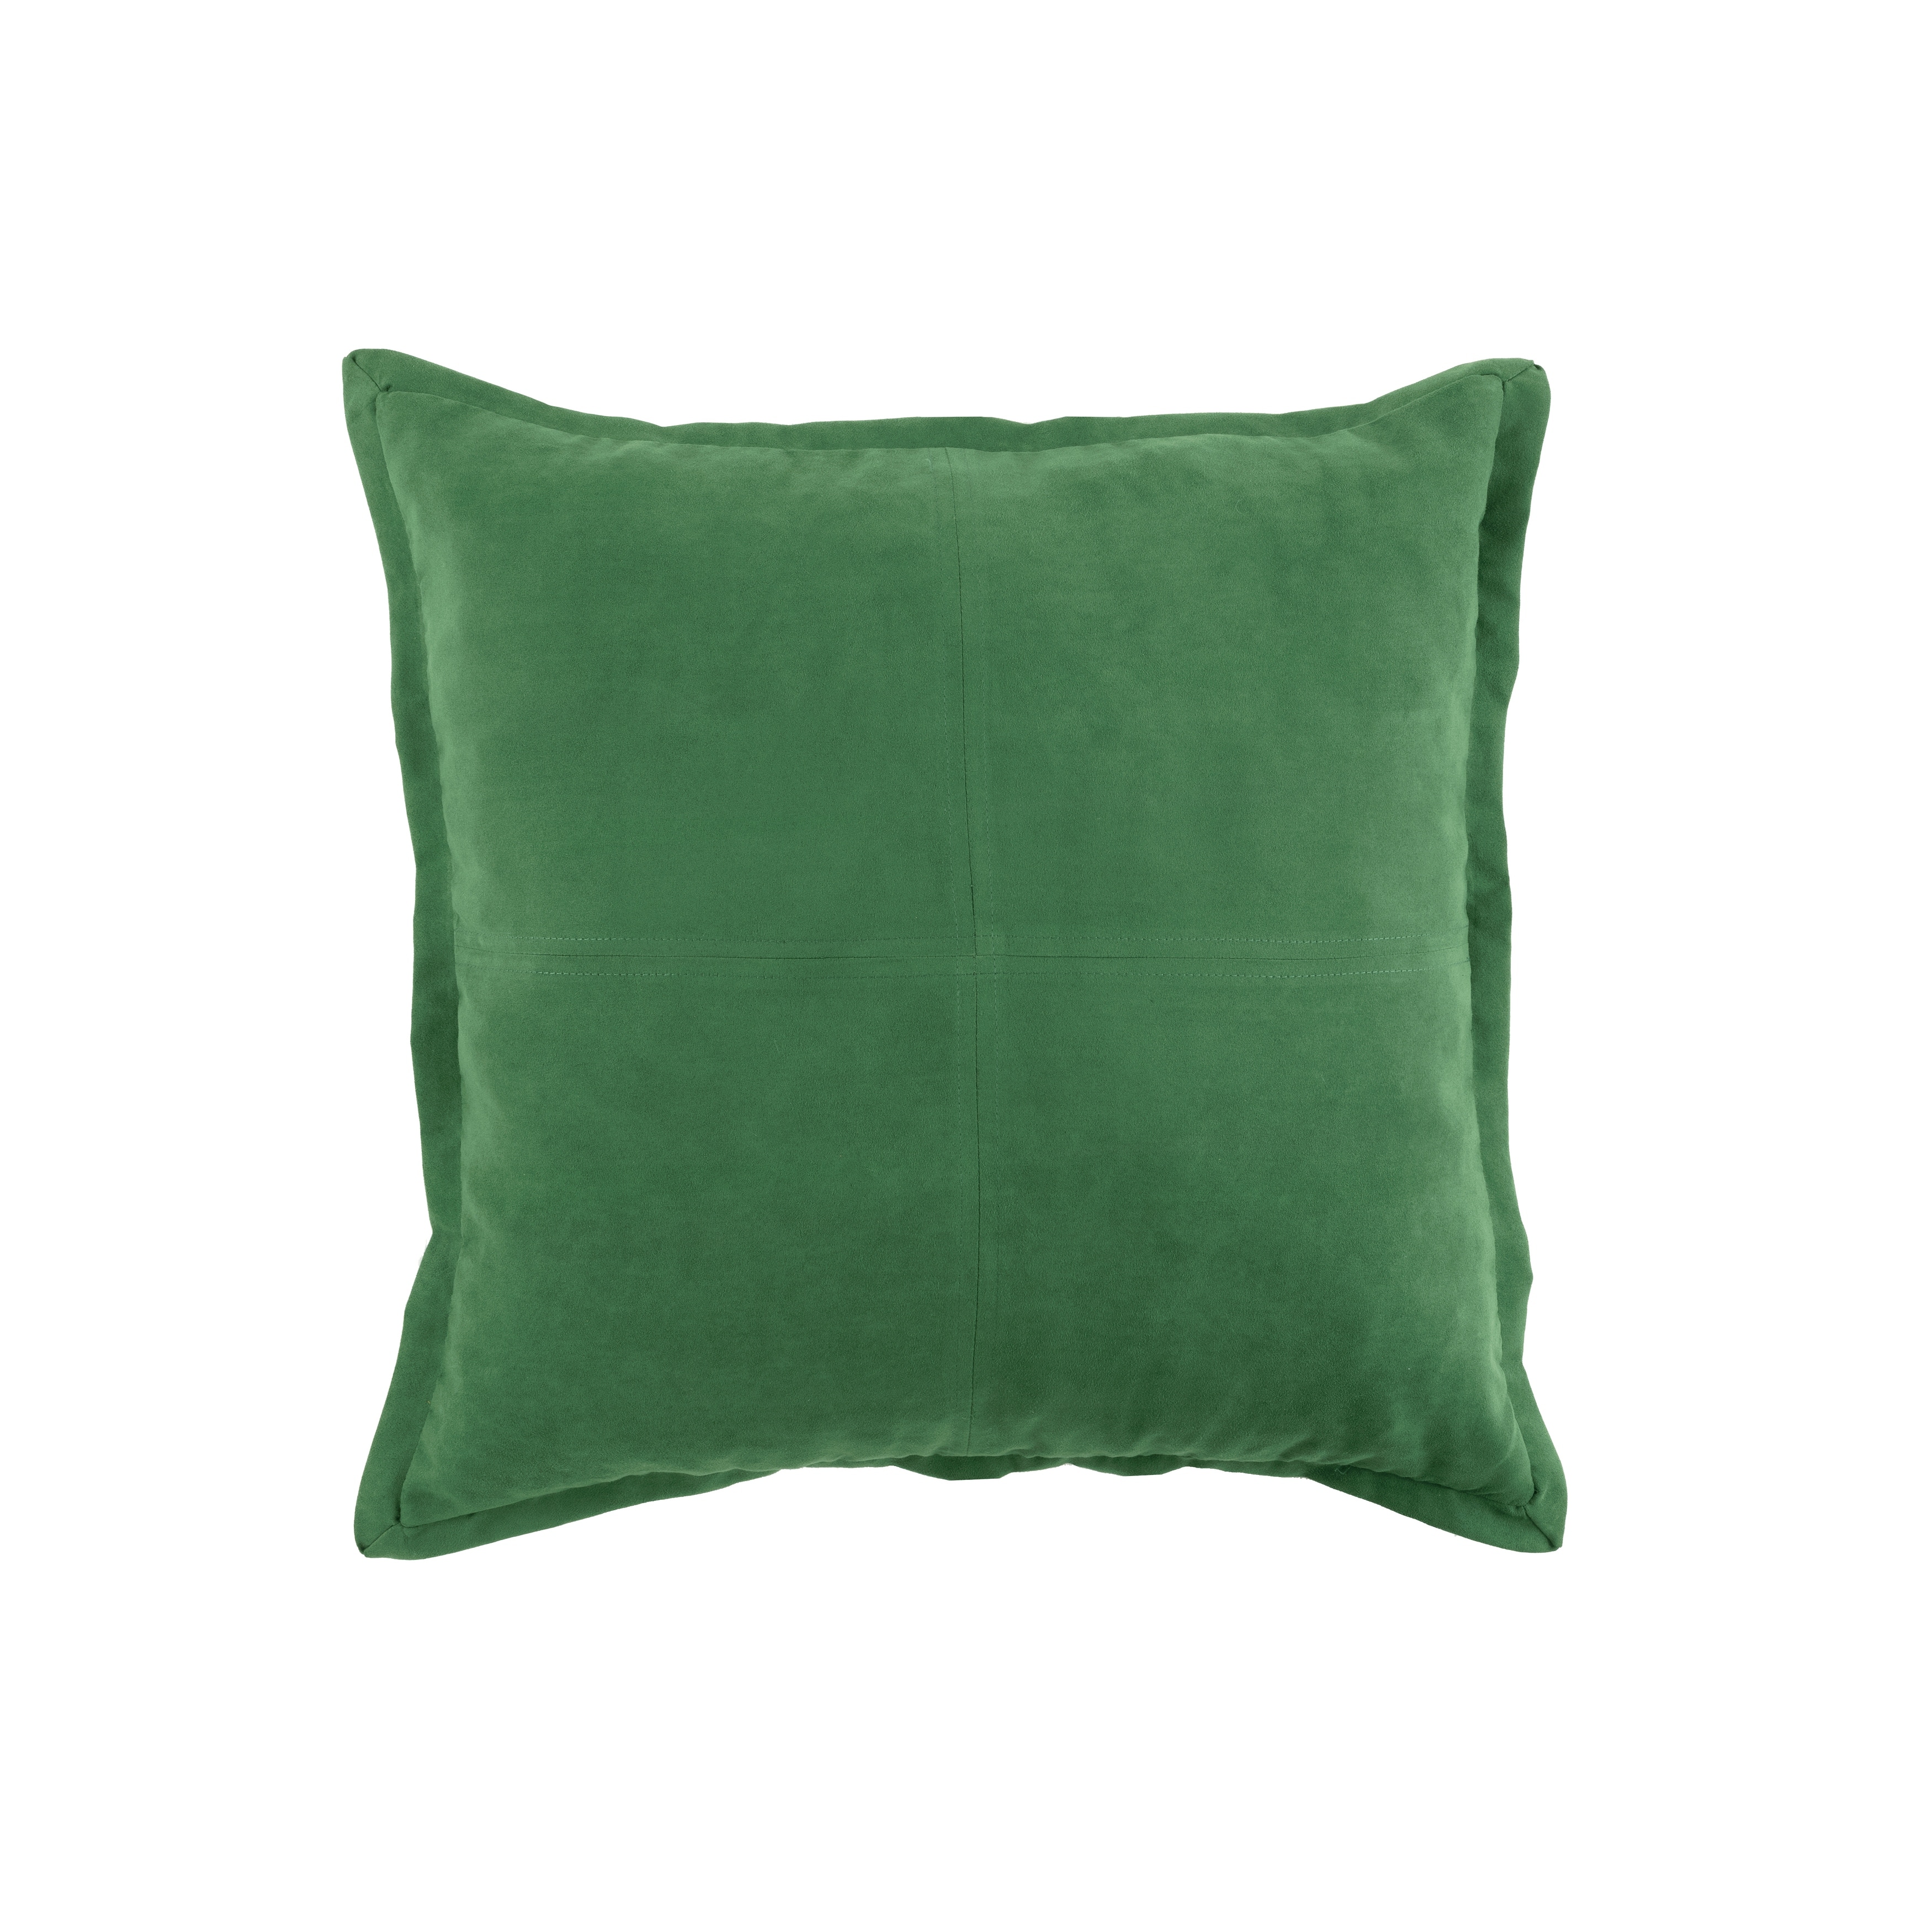 https://ak1.ostkcdn.com/images/products/is/images/direct/705afbbf912c5068caf67c49e028f59640545108/Lush-Decor-Faux-Suede-Decorative-Pillow-Single.jpg